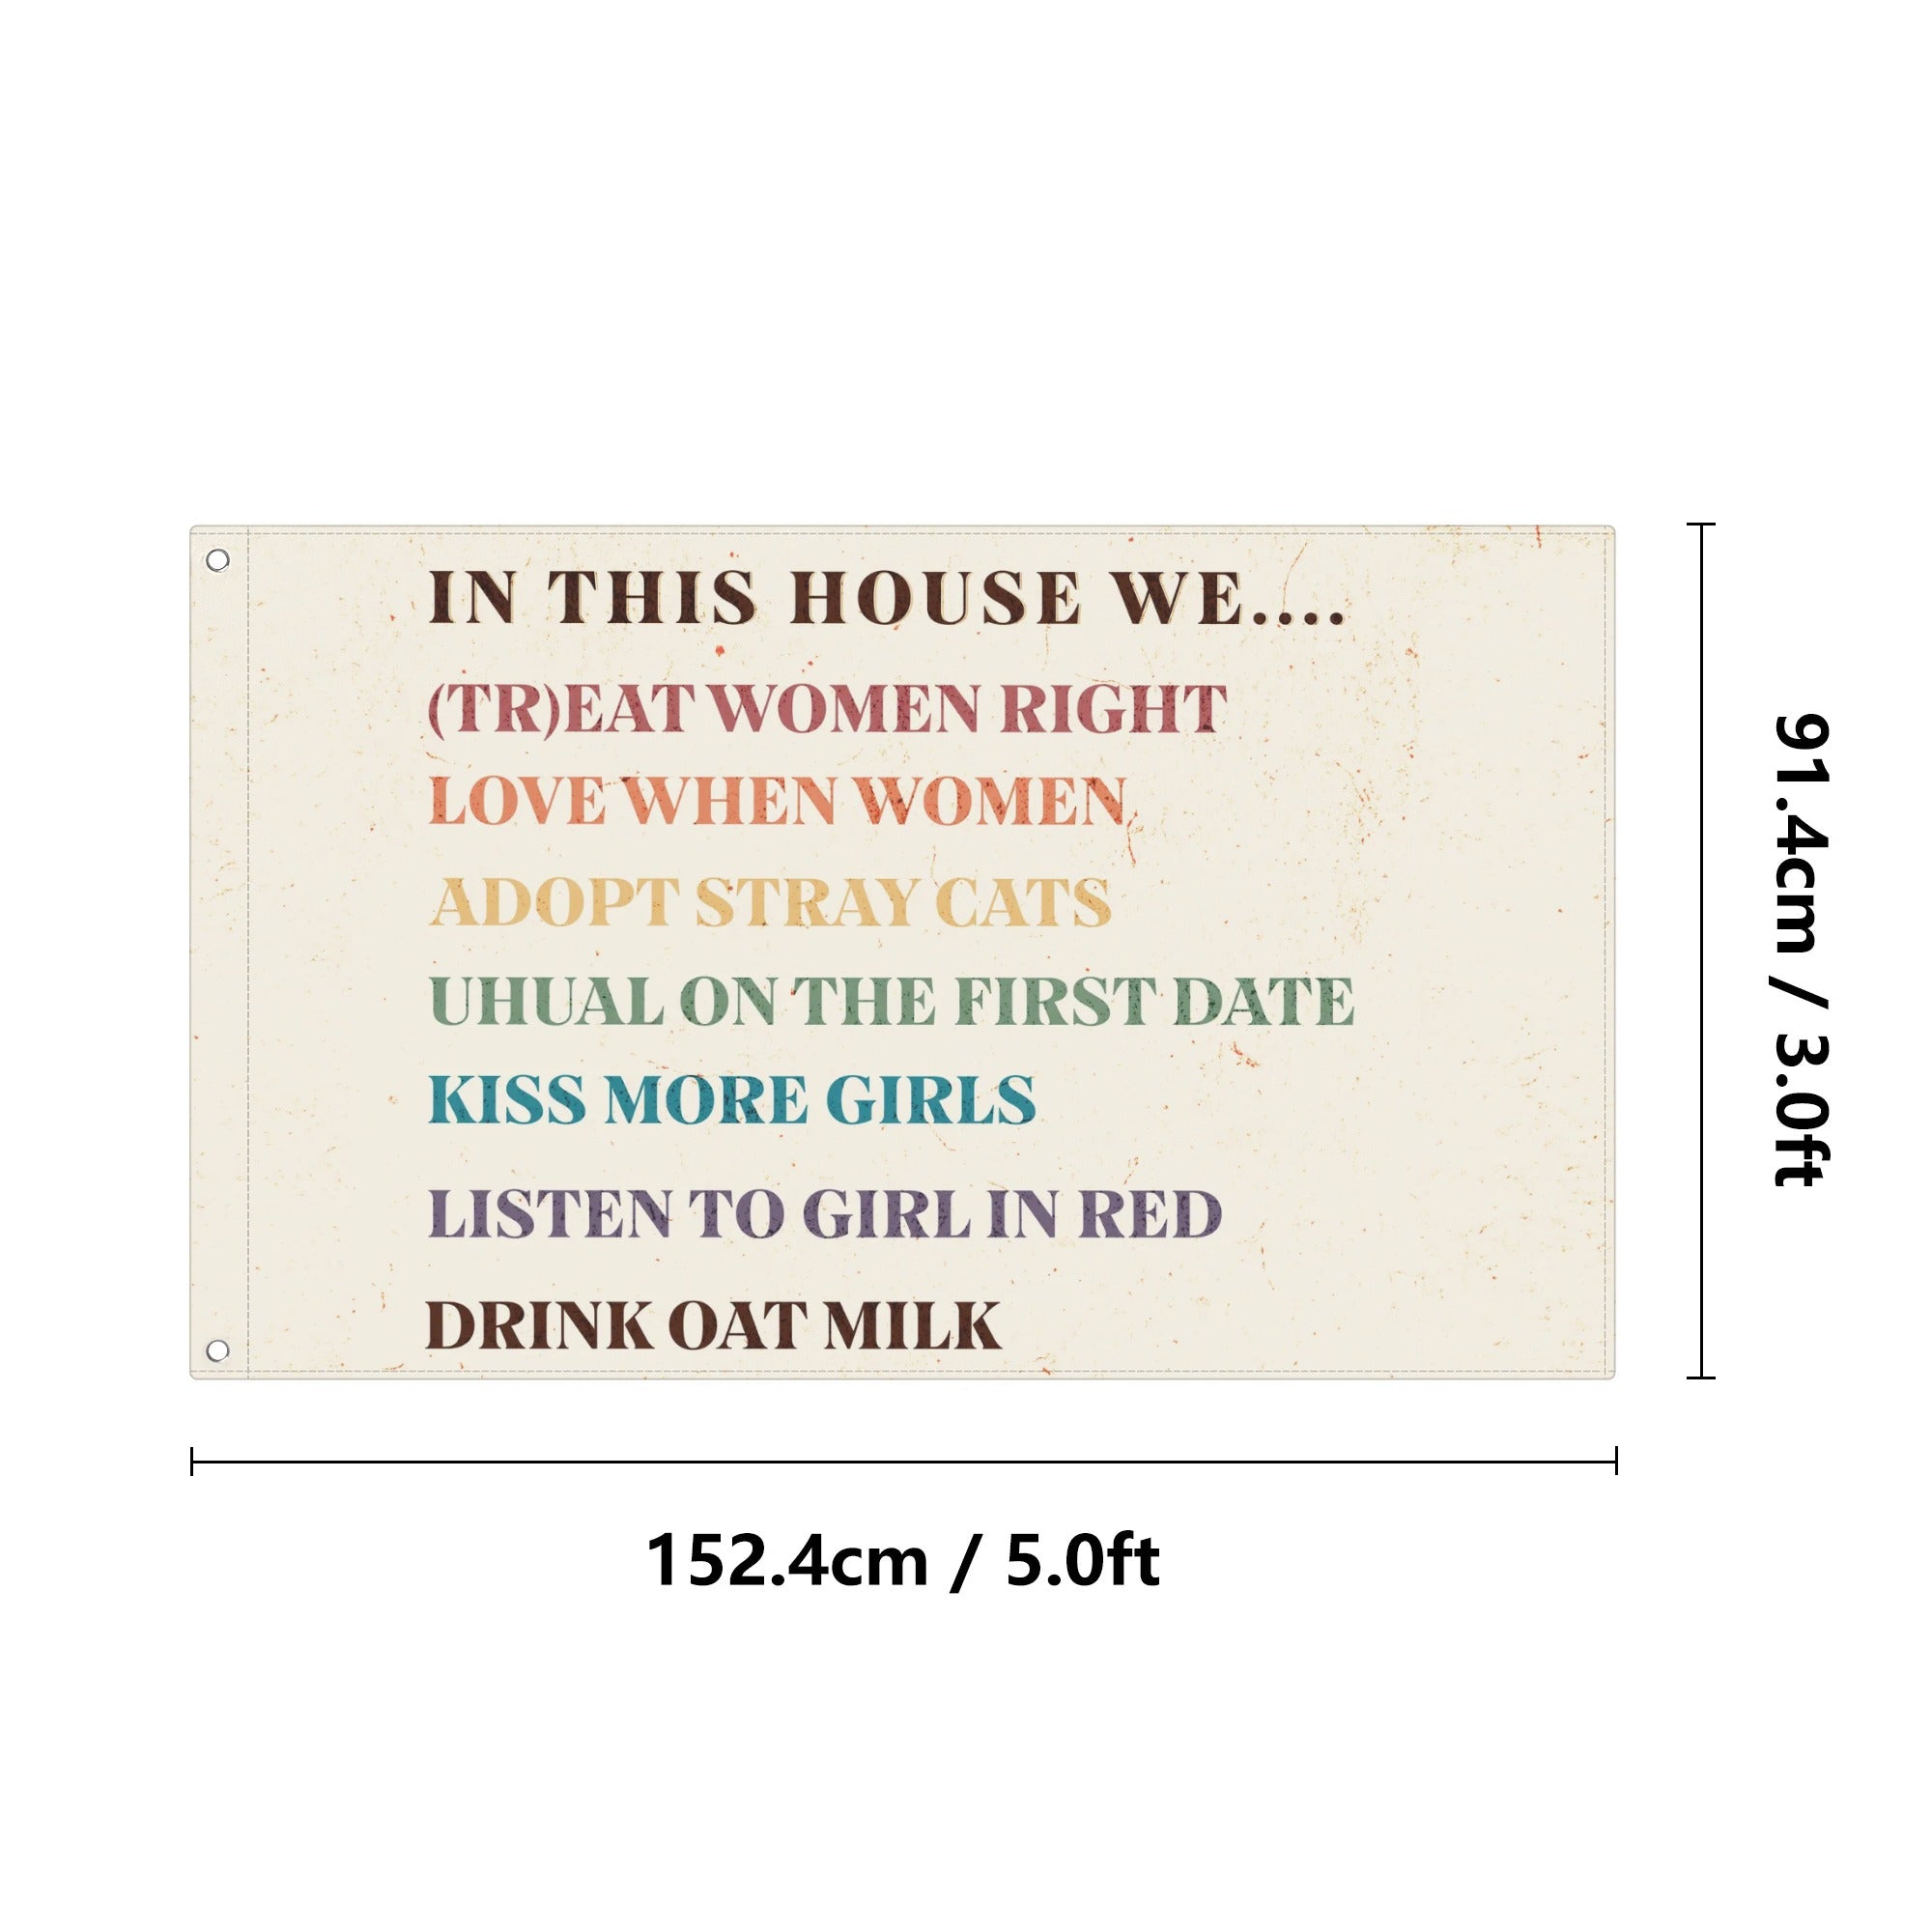 In this house we Lesbian Edition Flags 3x5 Ft - Rose Gold Co. Shop